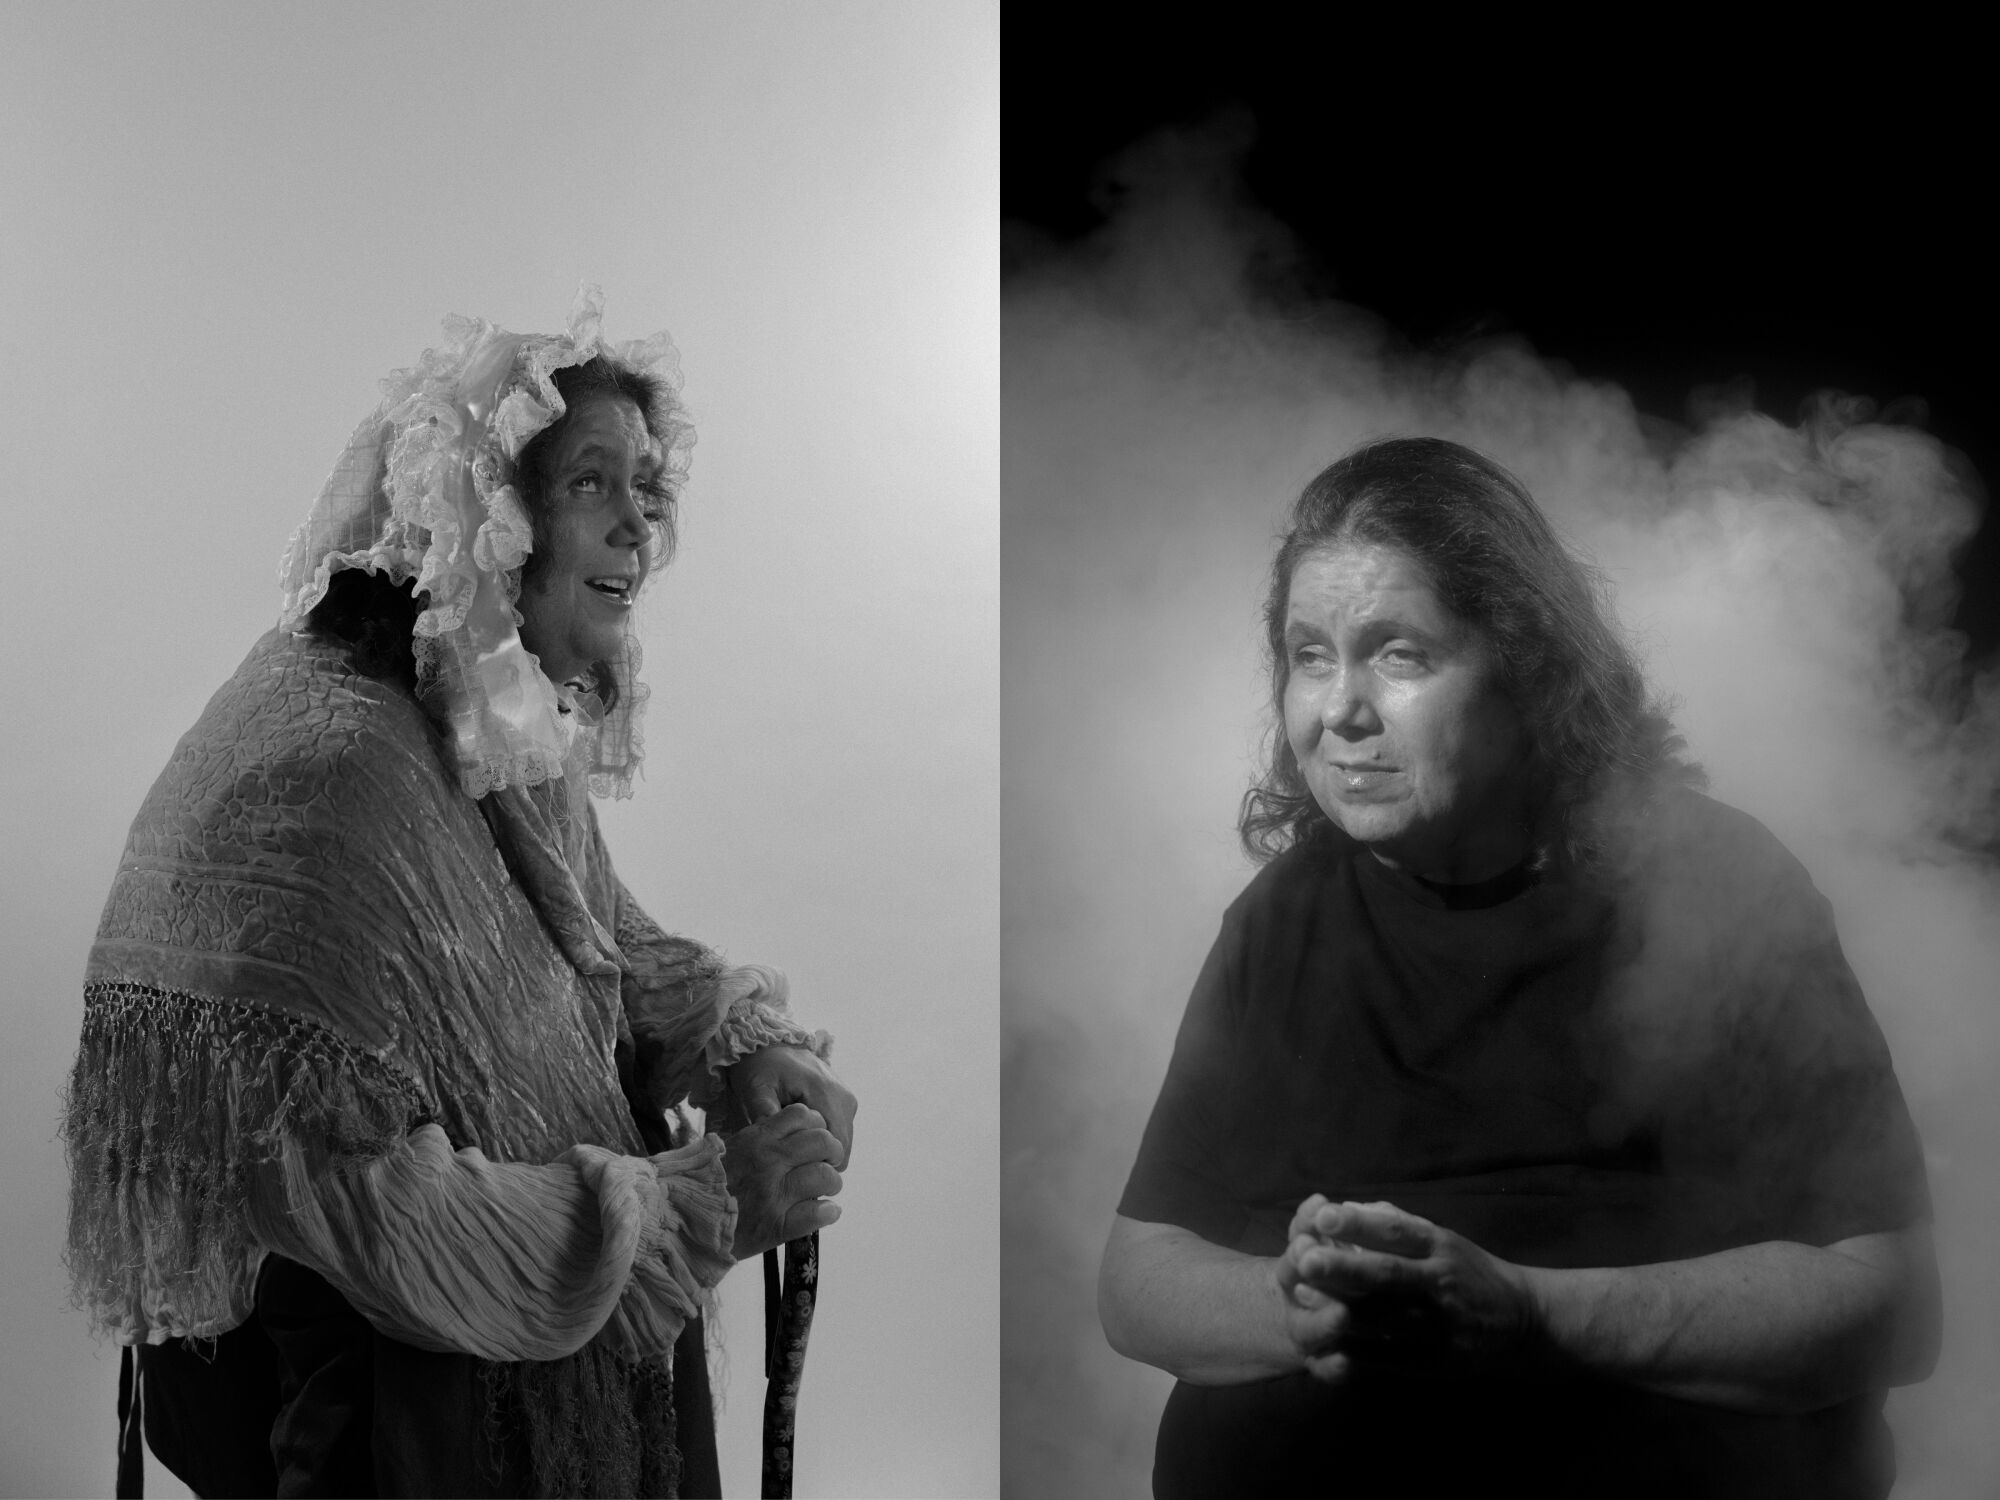 A split image shows a woman with a cane and bonnet, left, and wearing a black shirt surrounded by mist, right.